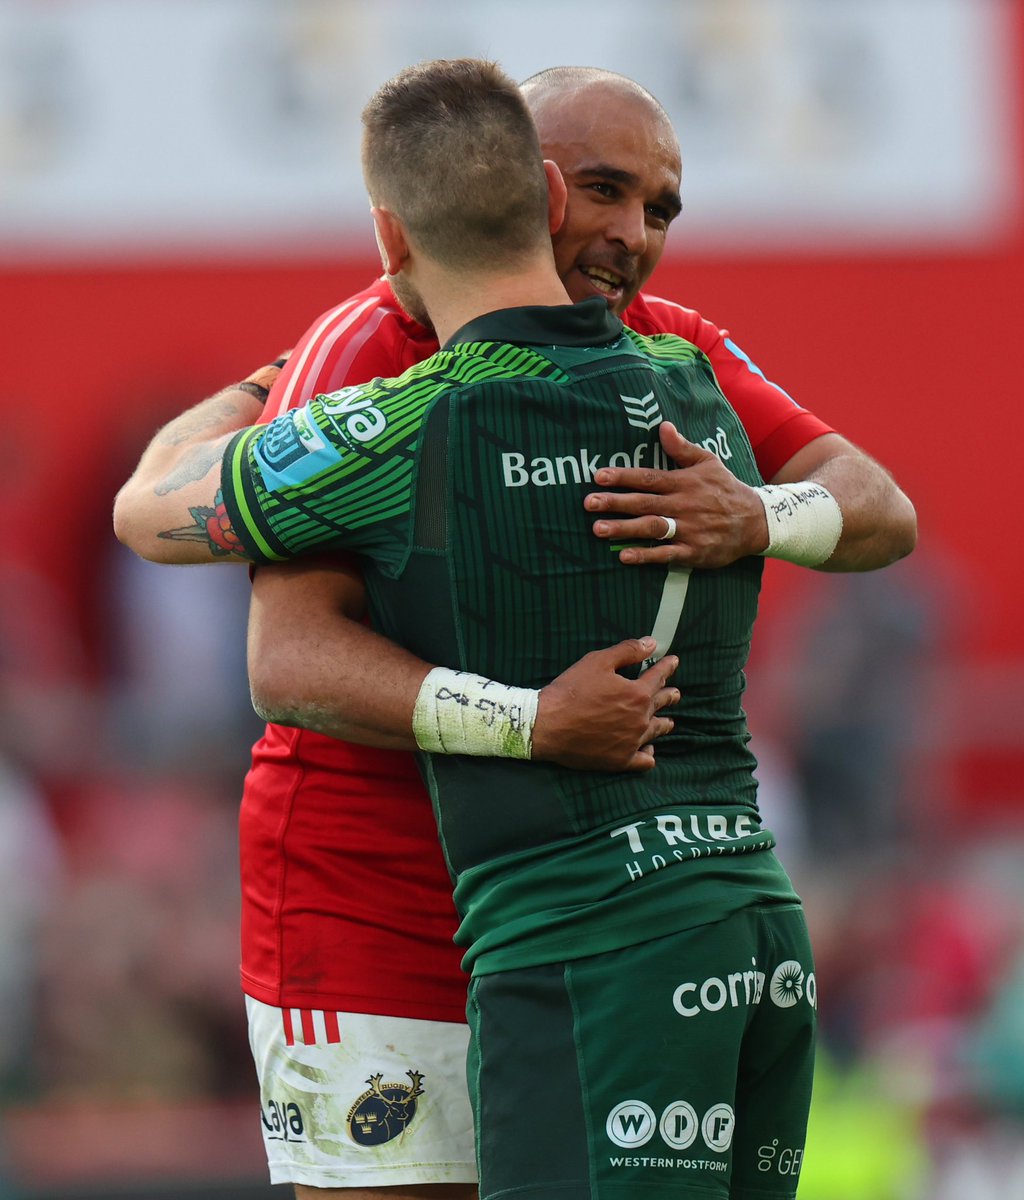 Always one of the toughest battles of the season, our thanks to @ConnachtRugby for a fantastic contest at Thomond Park yesterday & all the best for the remainder of the season 🤝 #MUNvCON #SUAF 🔴